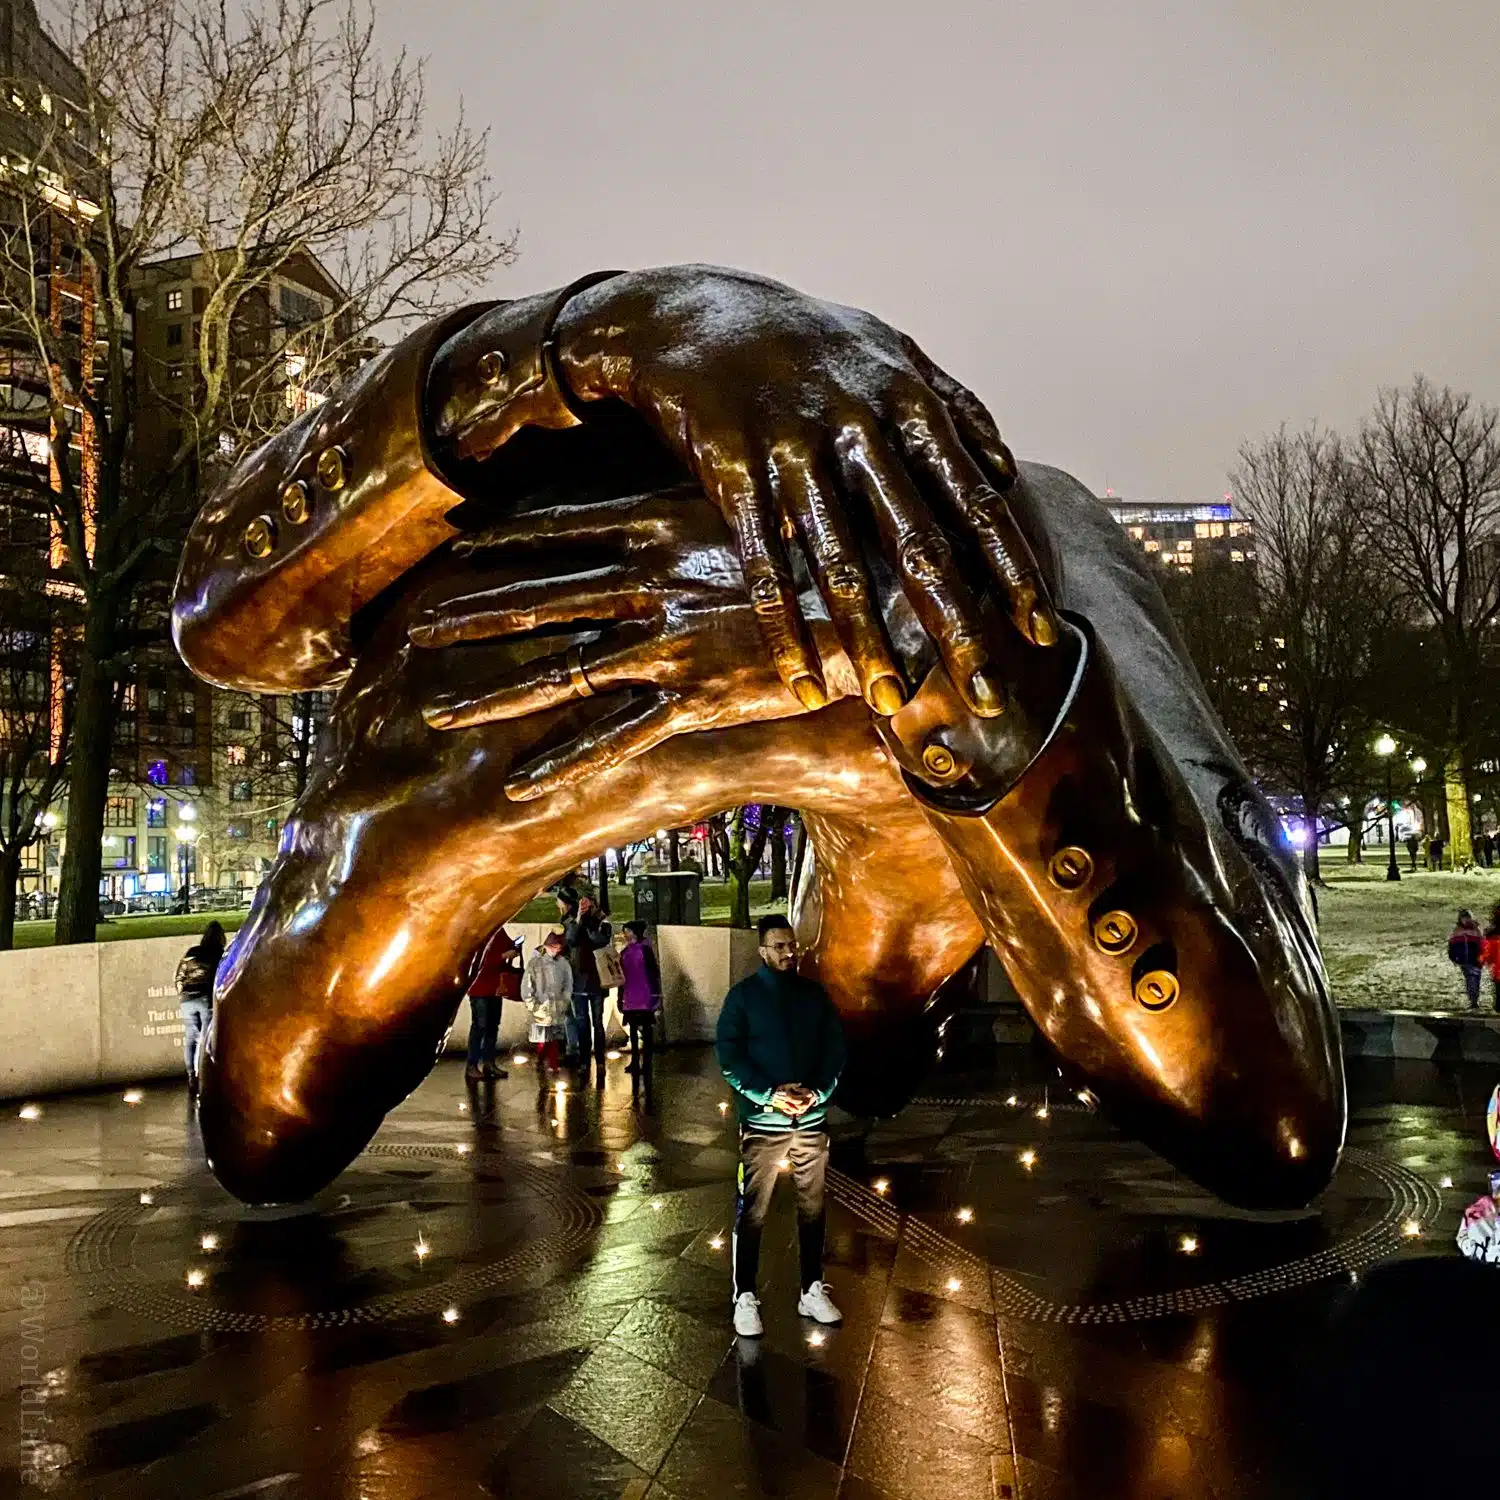 The Embrace sculpture at night.